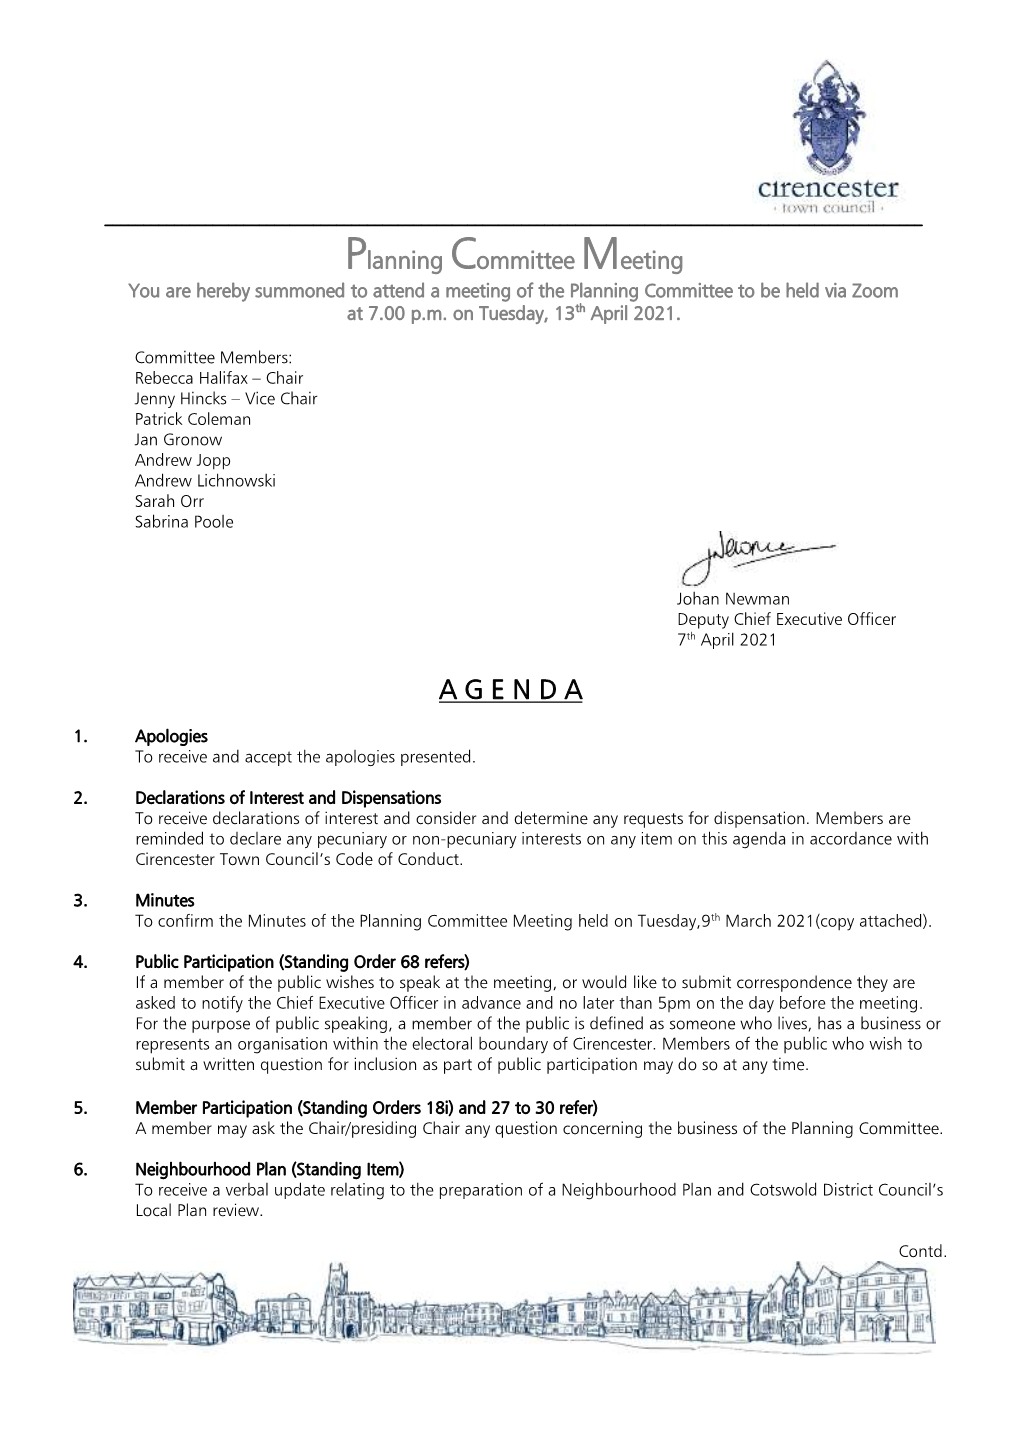 Planning Committee Meeting You Are Hereby Summoned to Attend a Meeting of the Planning Committee to Be Held Via Zoom at 7.00 P.M